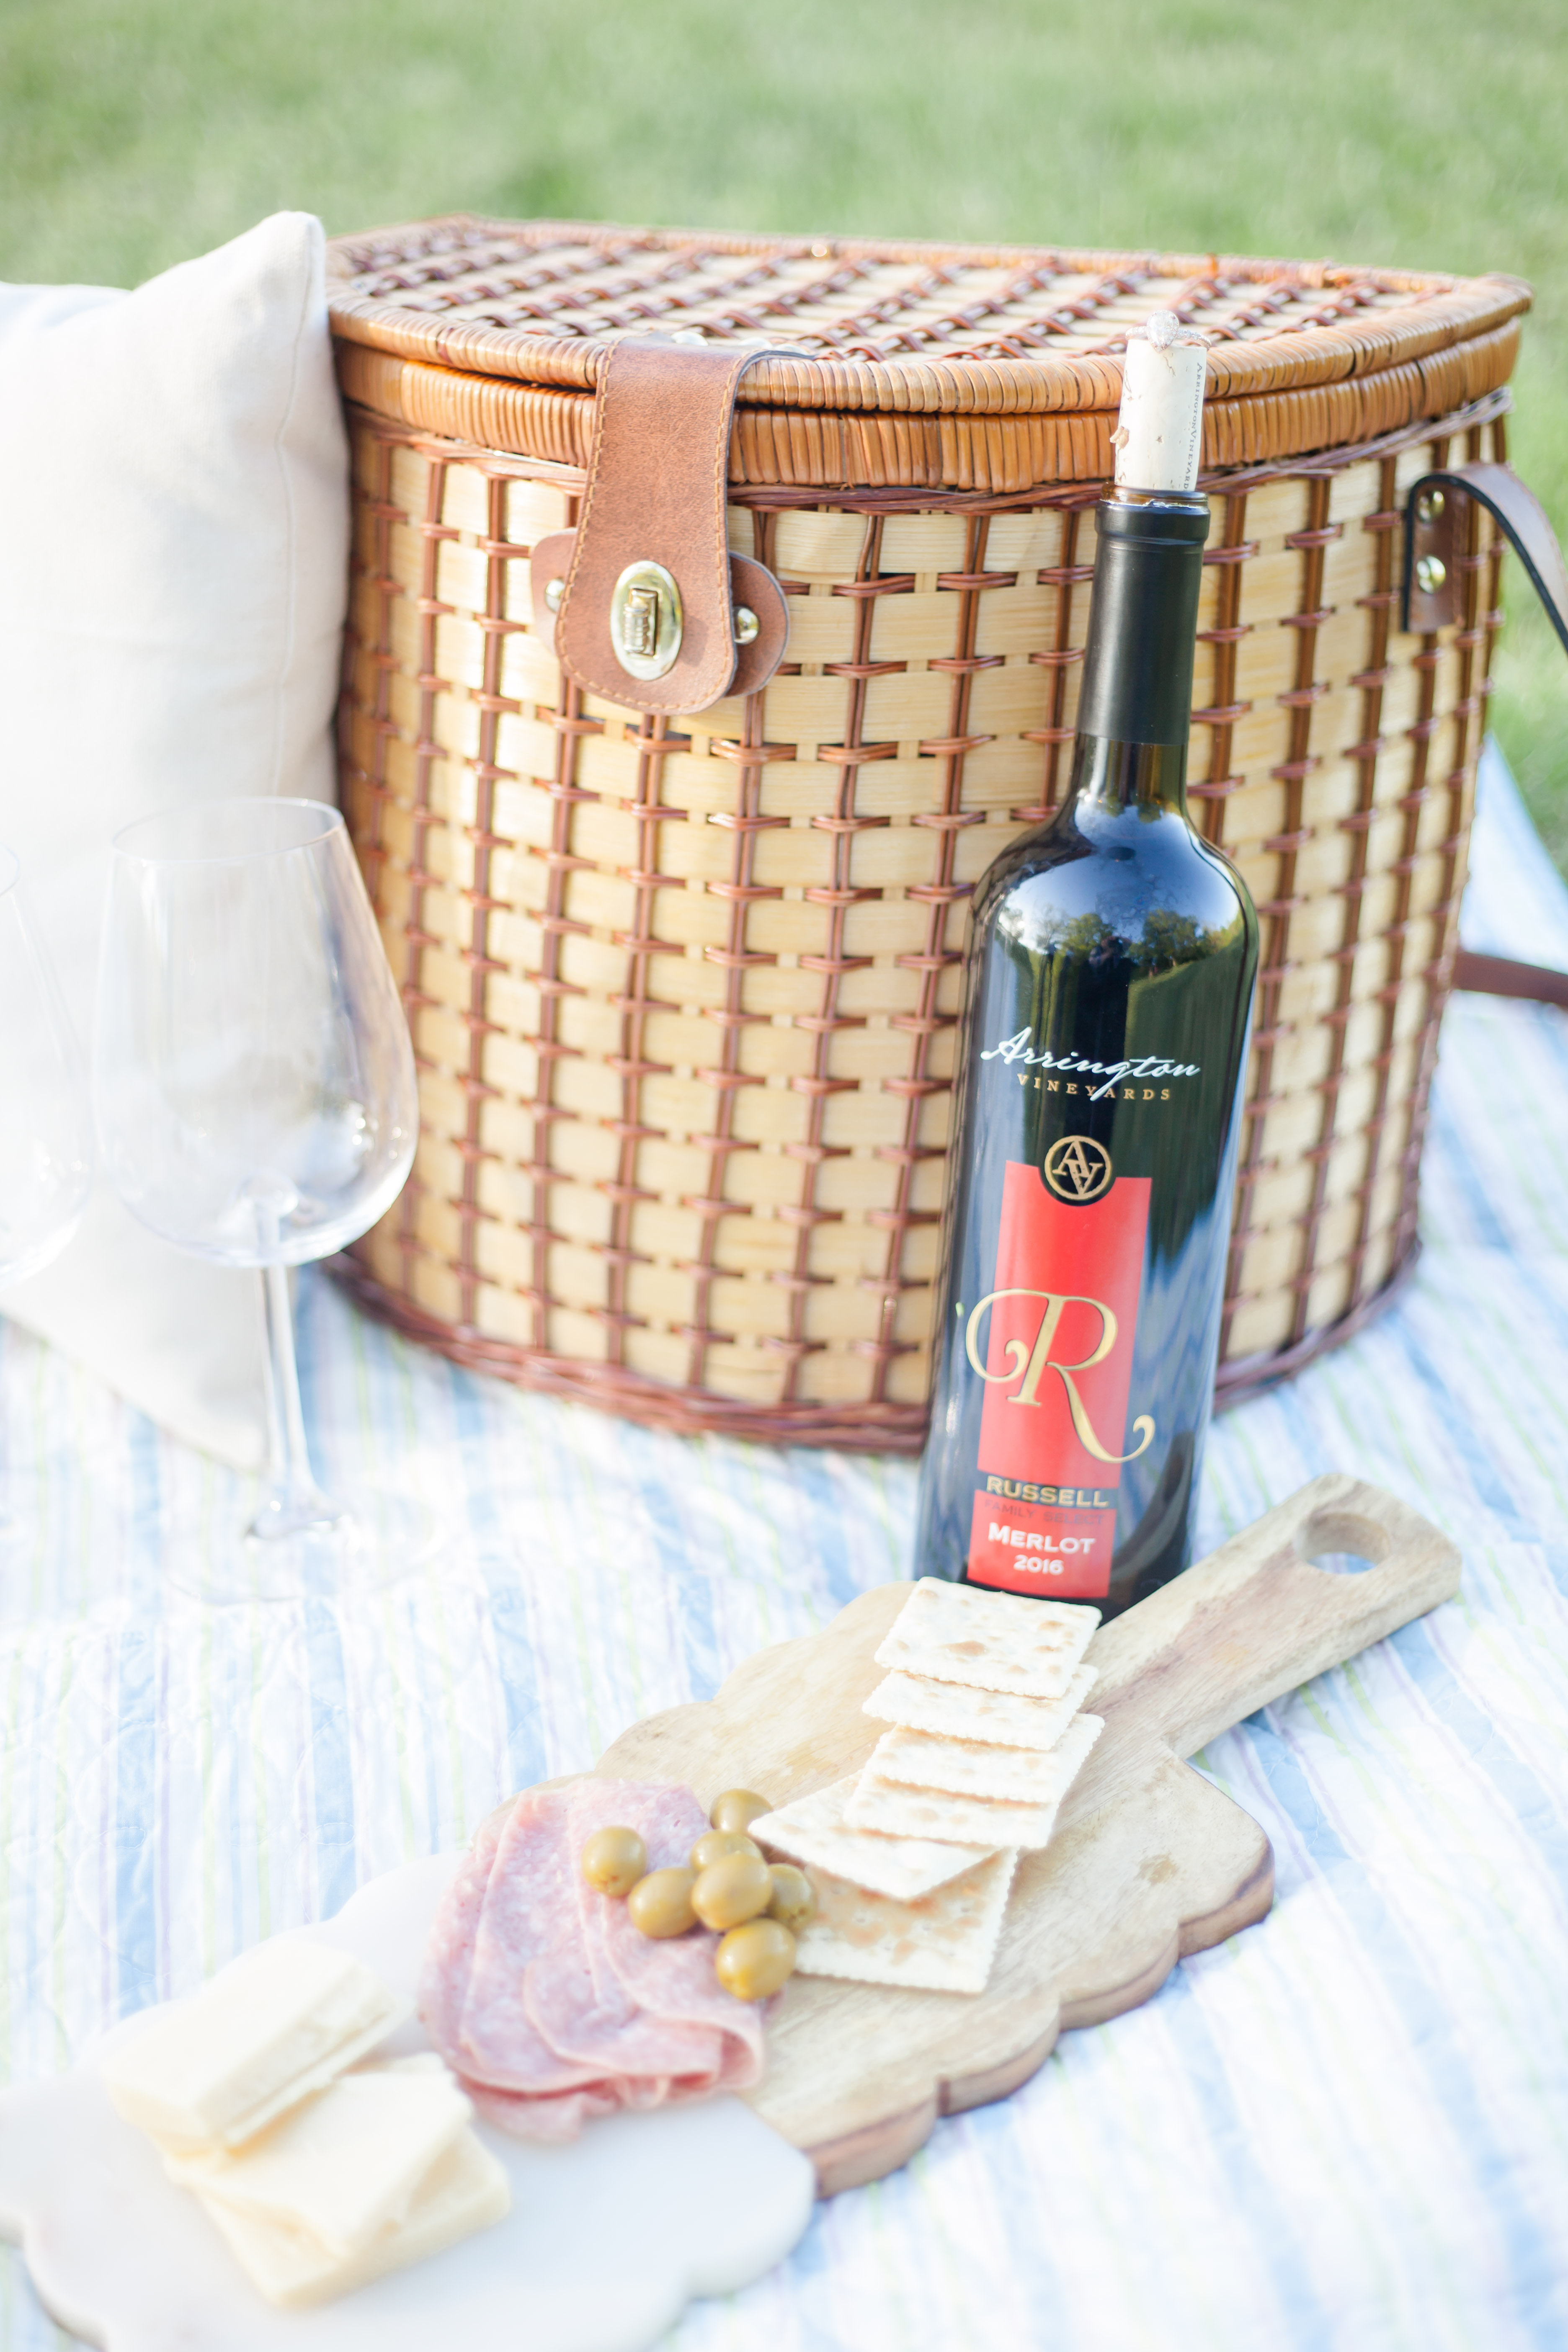 cheese board and arrington vineyards wine bottle